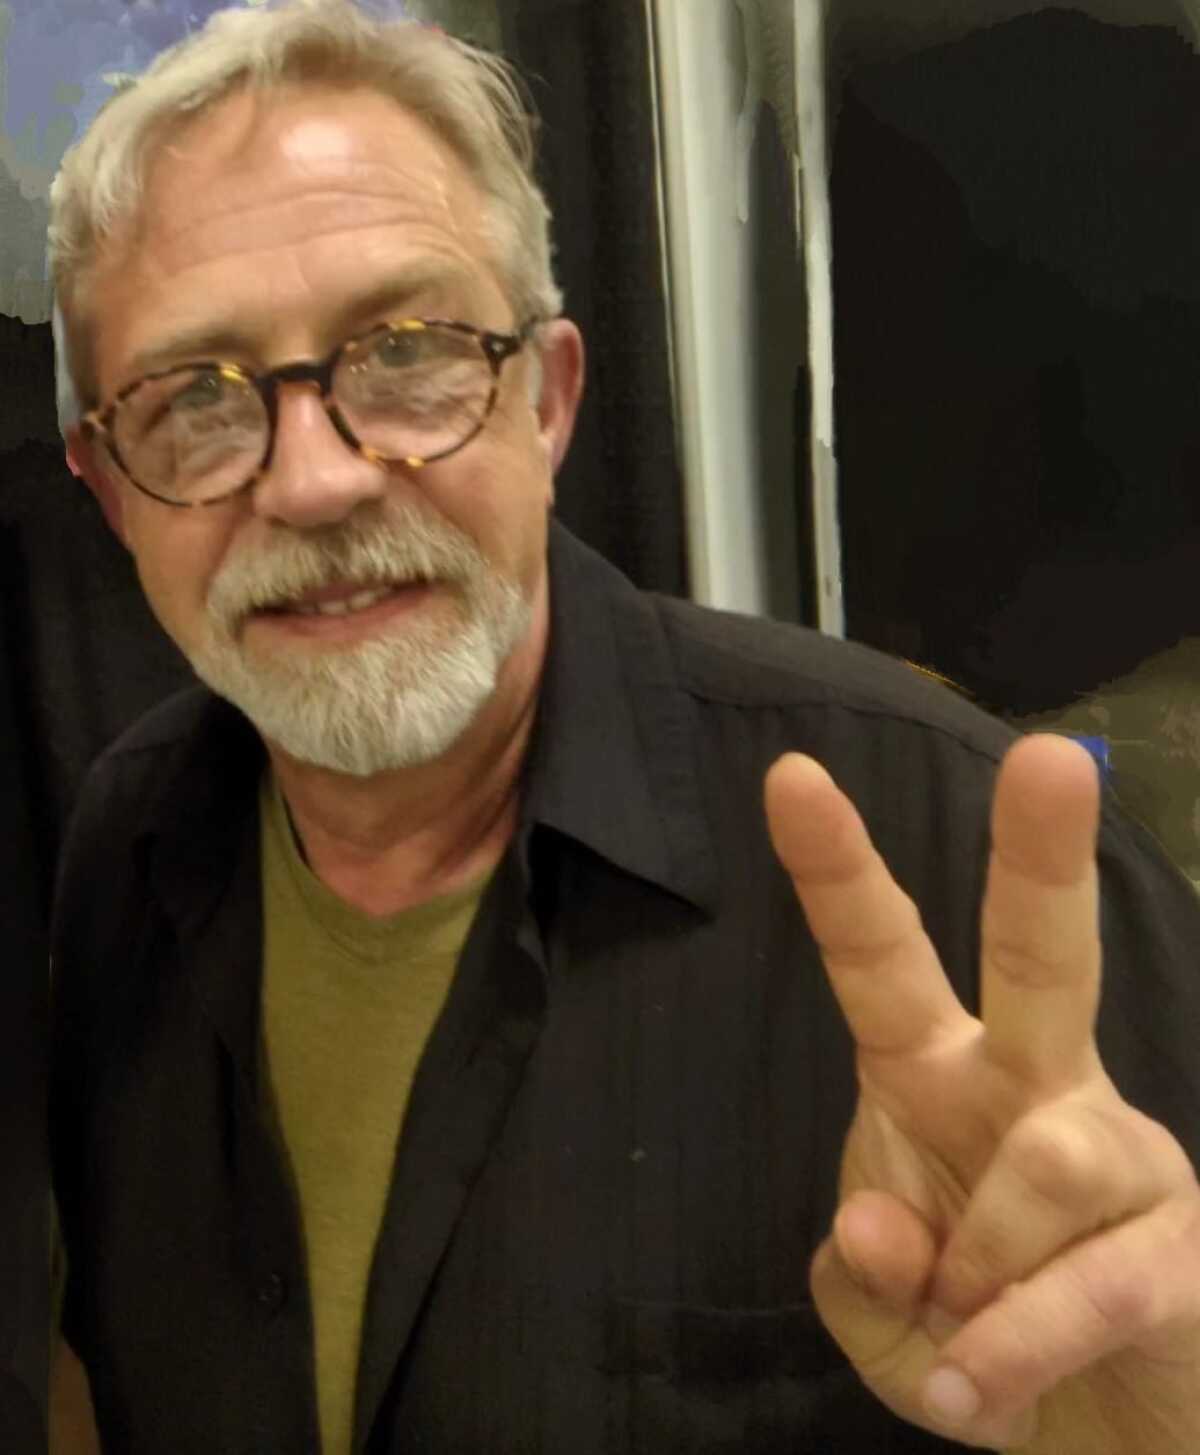 A man with gray hair, a beard and glasses striking a peace-sign pose